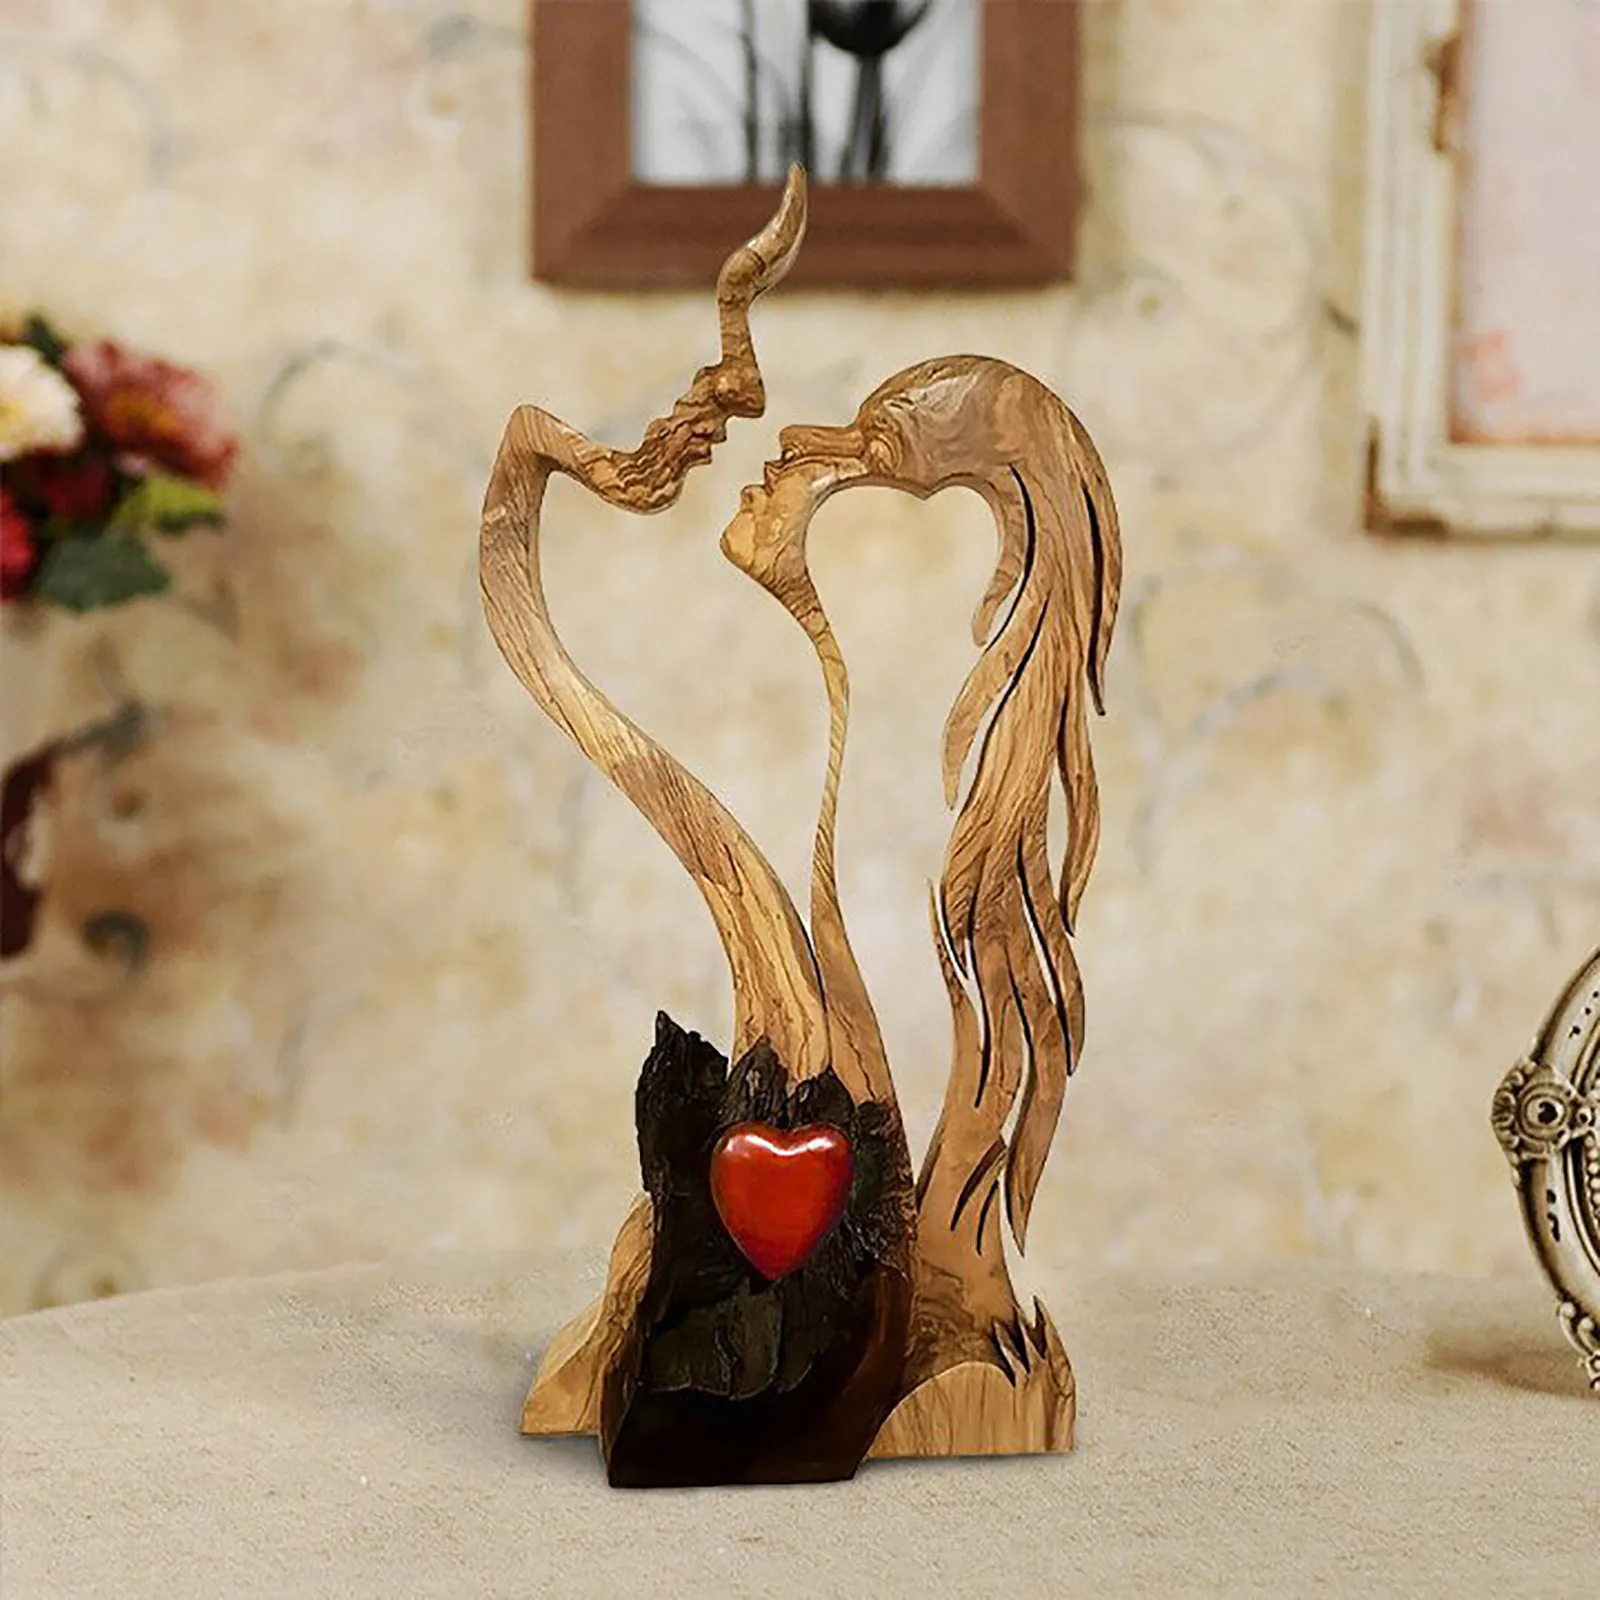 

Love Eternal Wooden Valentine's Day Ornaments Male Female Kissing Statue Handmade Abstract Sculpture Ornaments Home Decoration